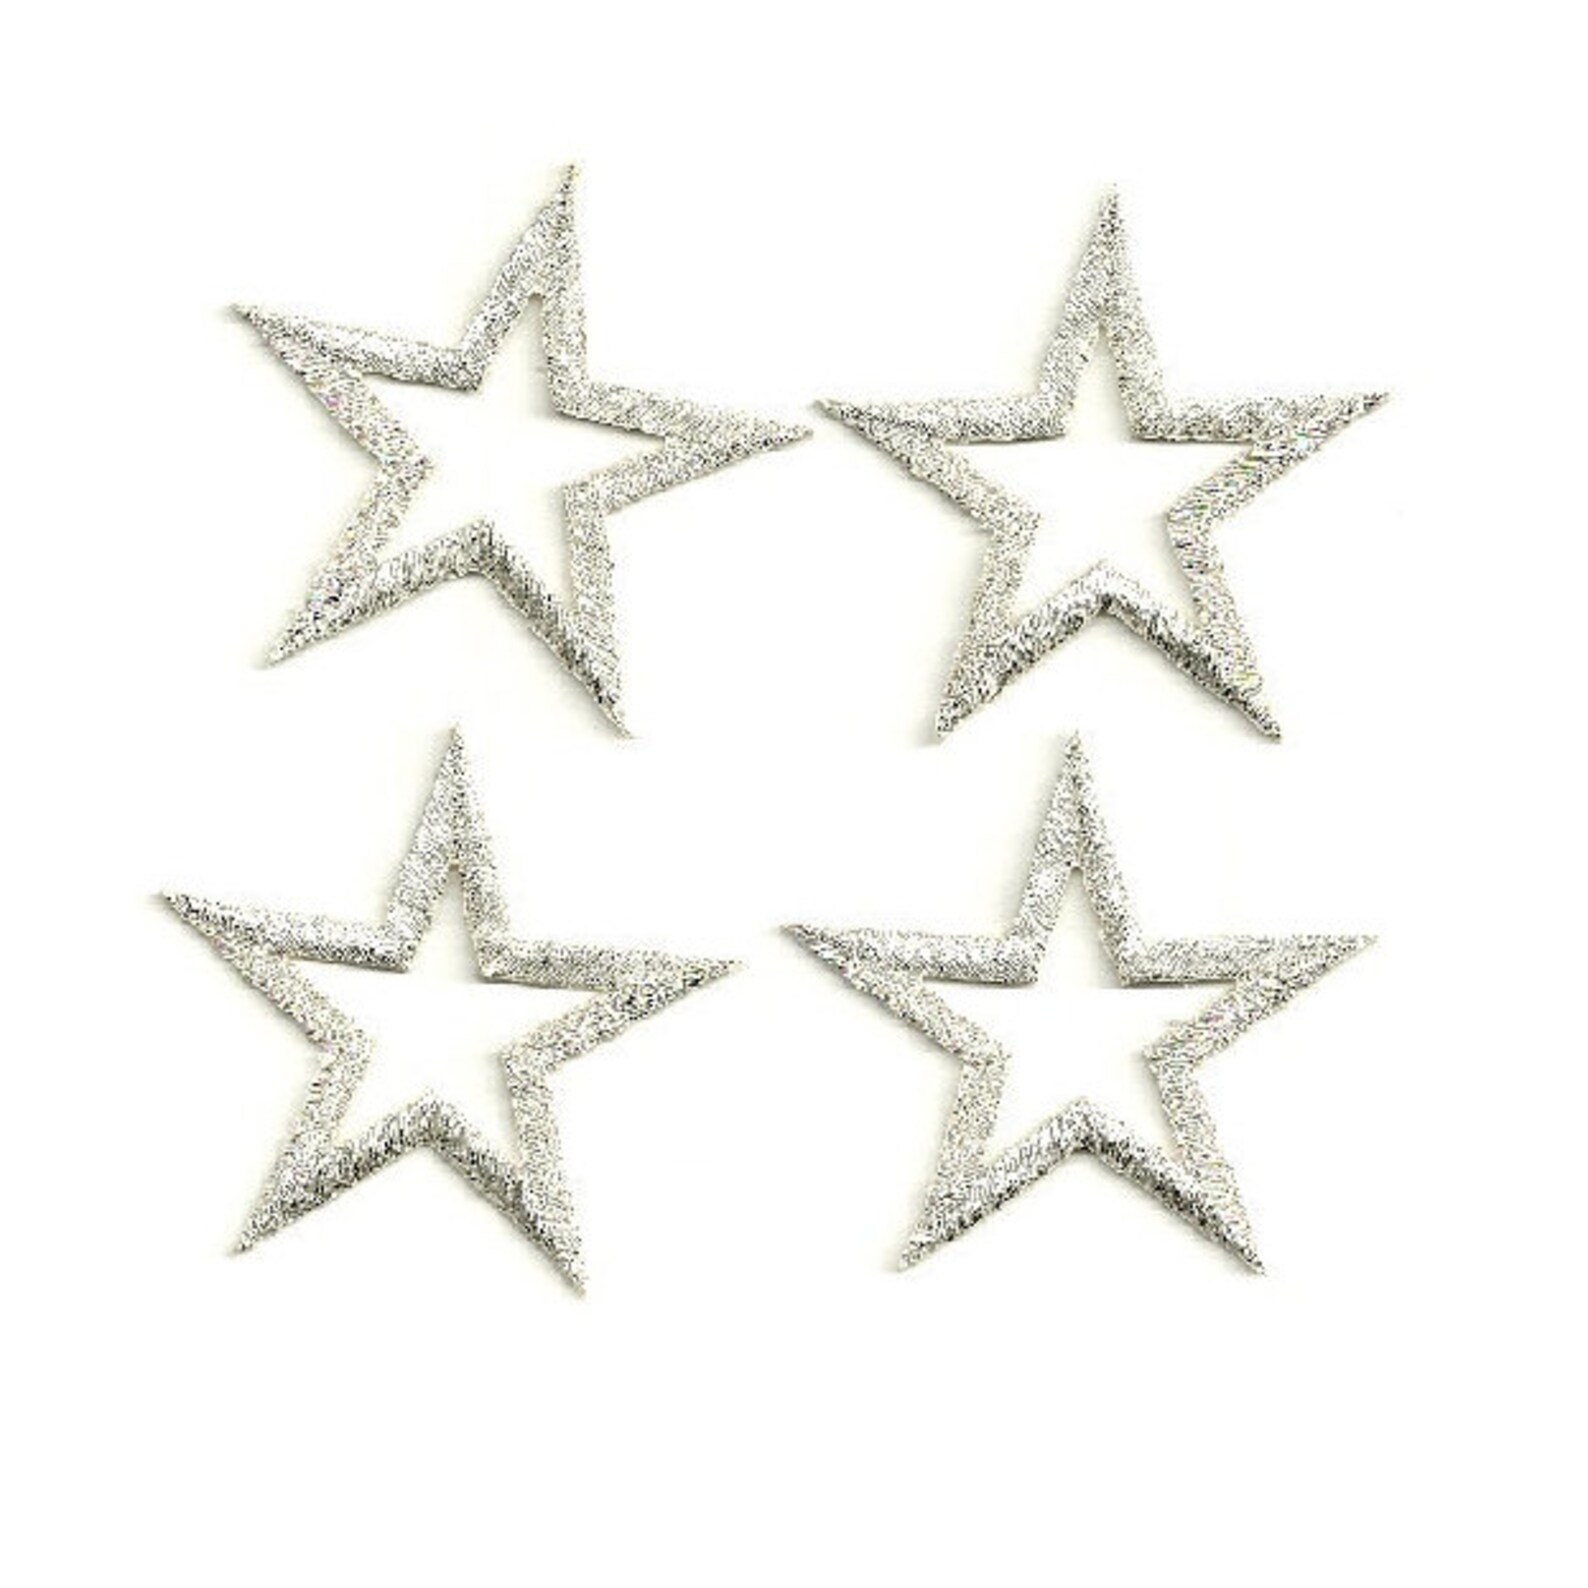 Stars Star Silver Embroidered OPEN Silver Metallic Stars - Etsy